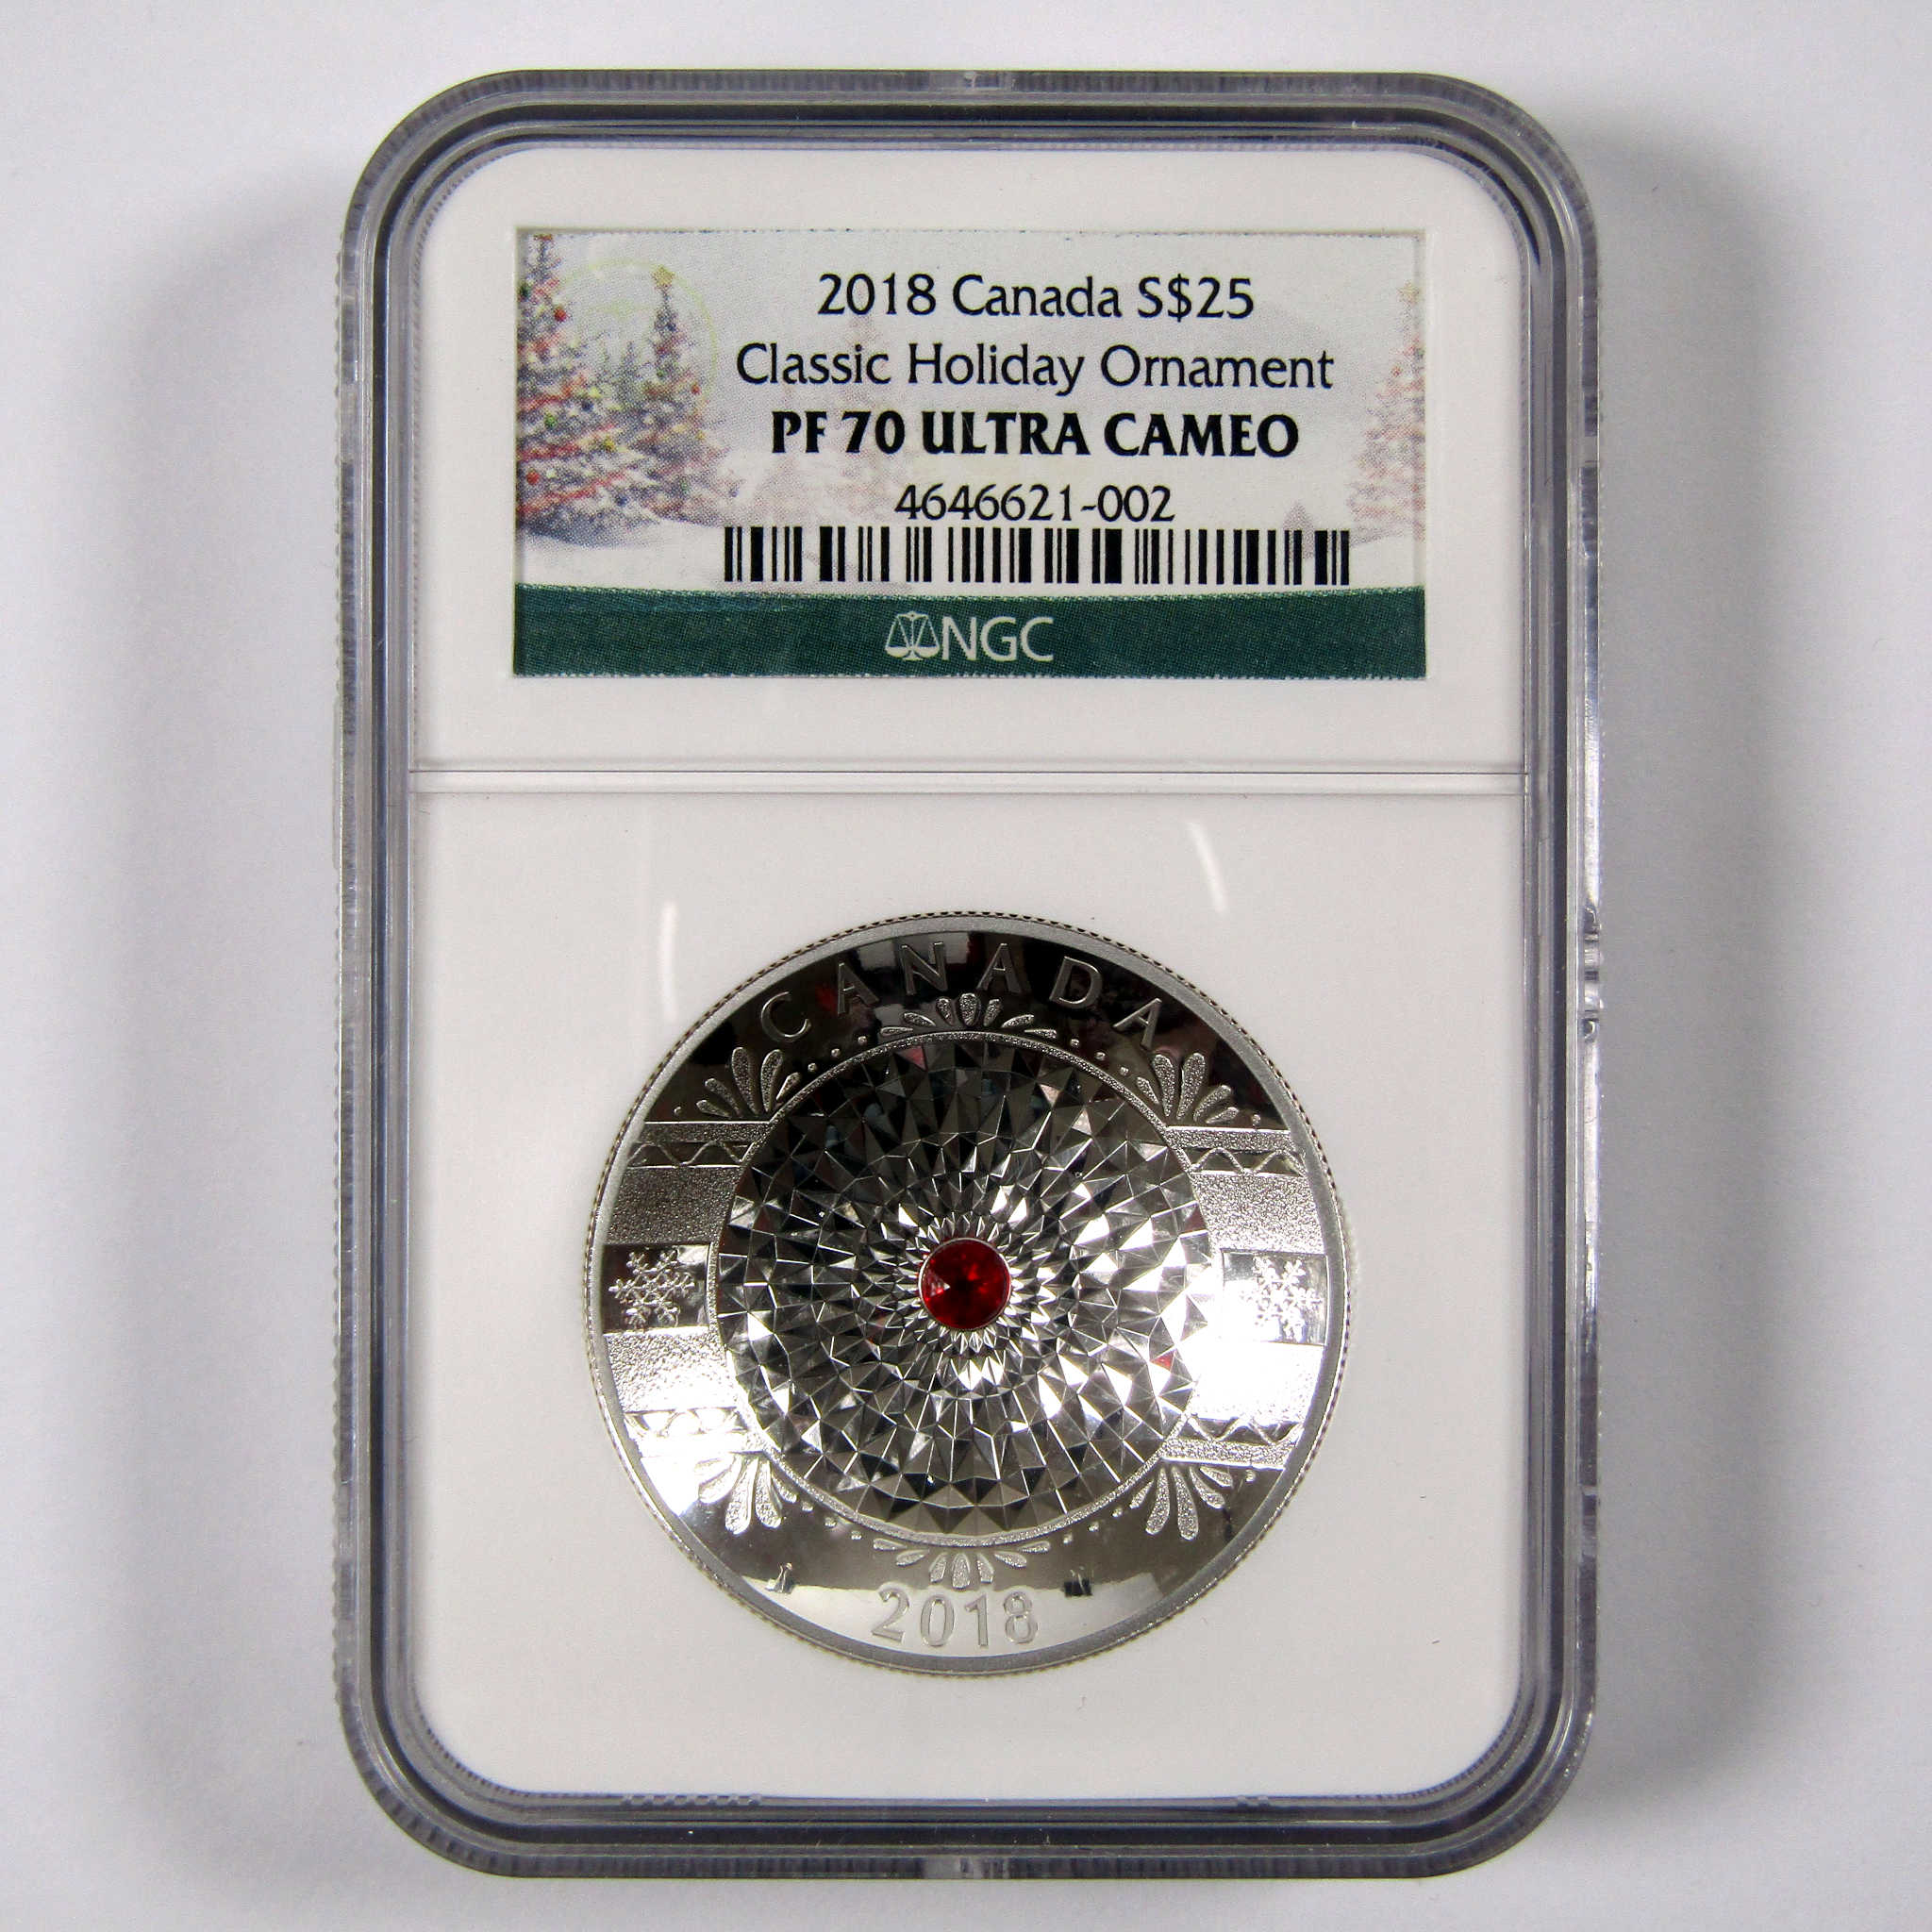 2018 Canadian Classic Holiday Ornament Coin PF 70 NGC $25 SKU:CPC3599